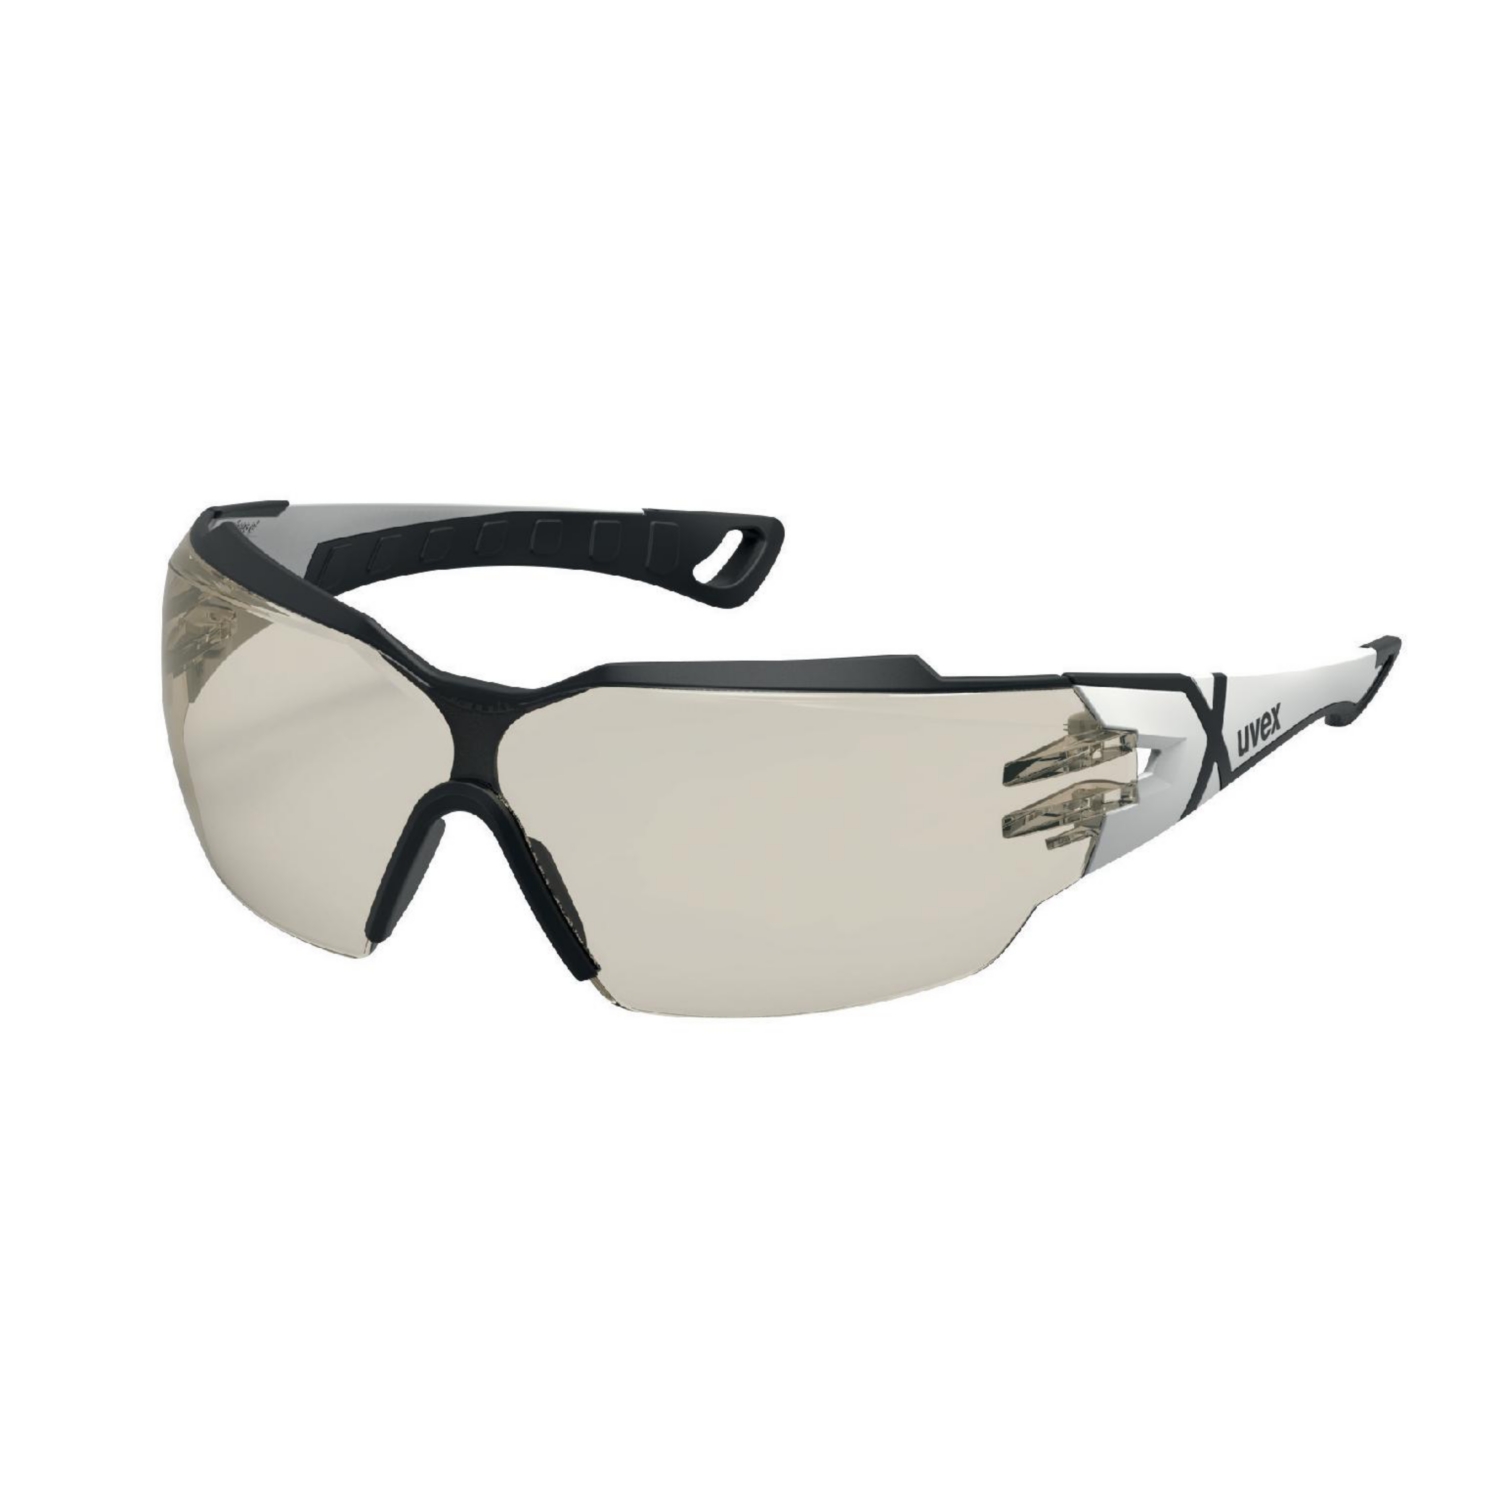 Lunettes de protection in/out Pheos cx2 Uvex 